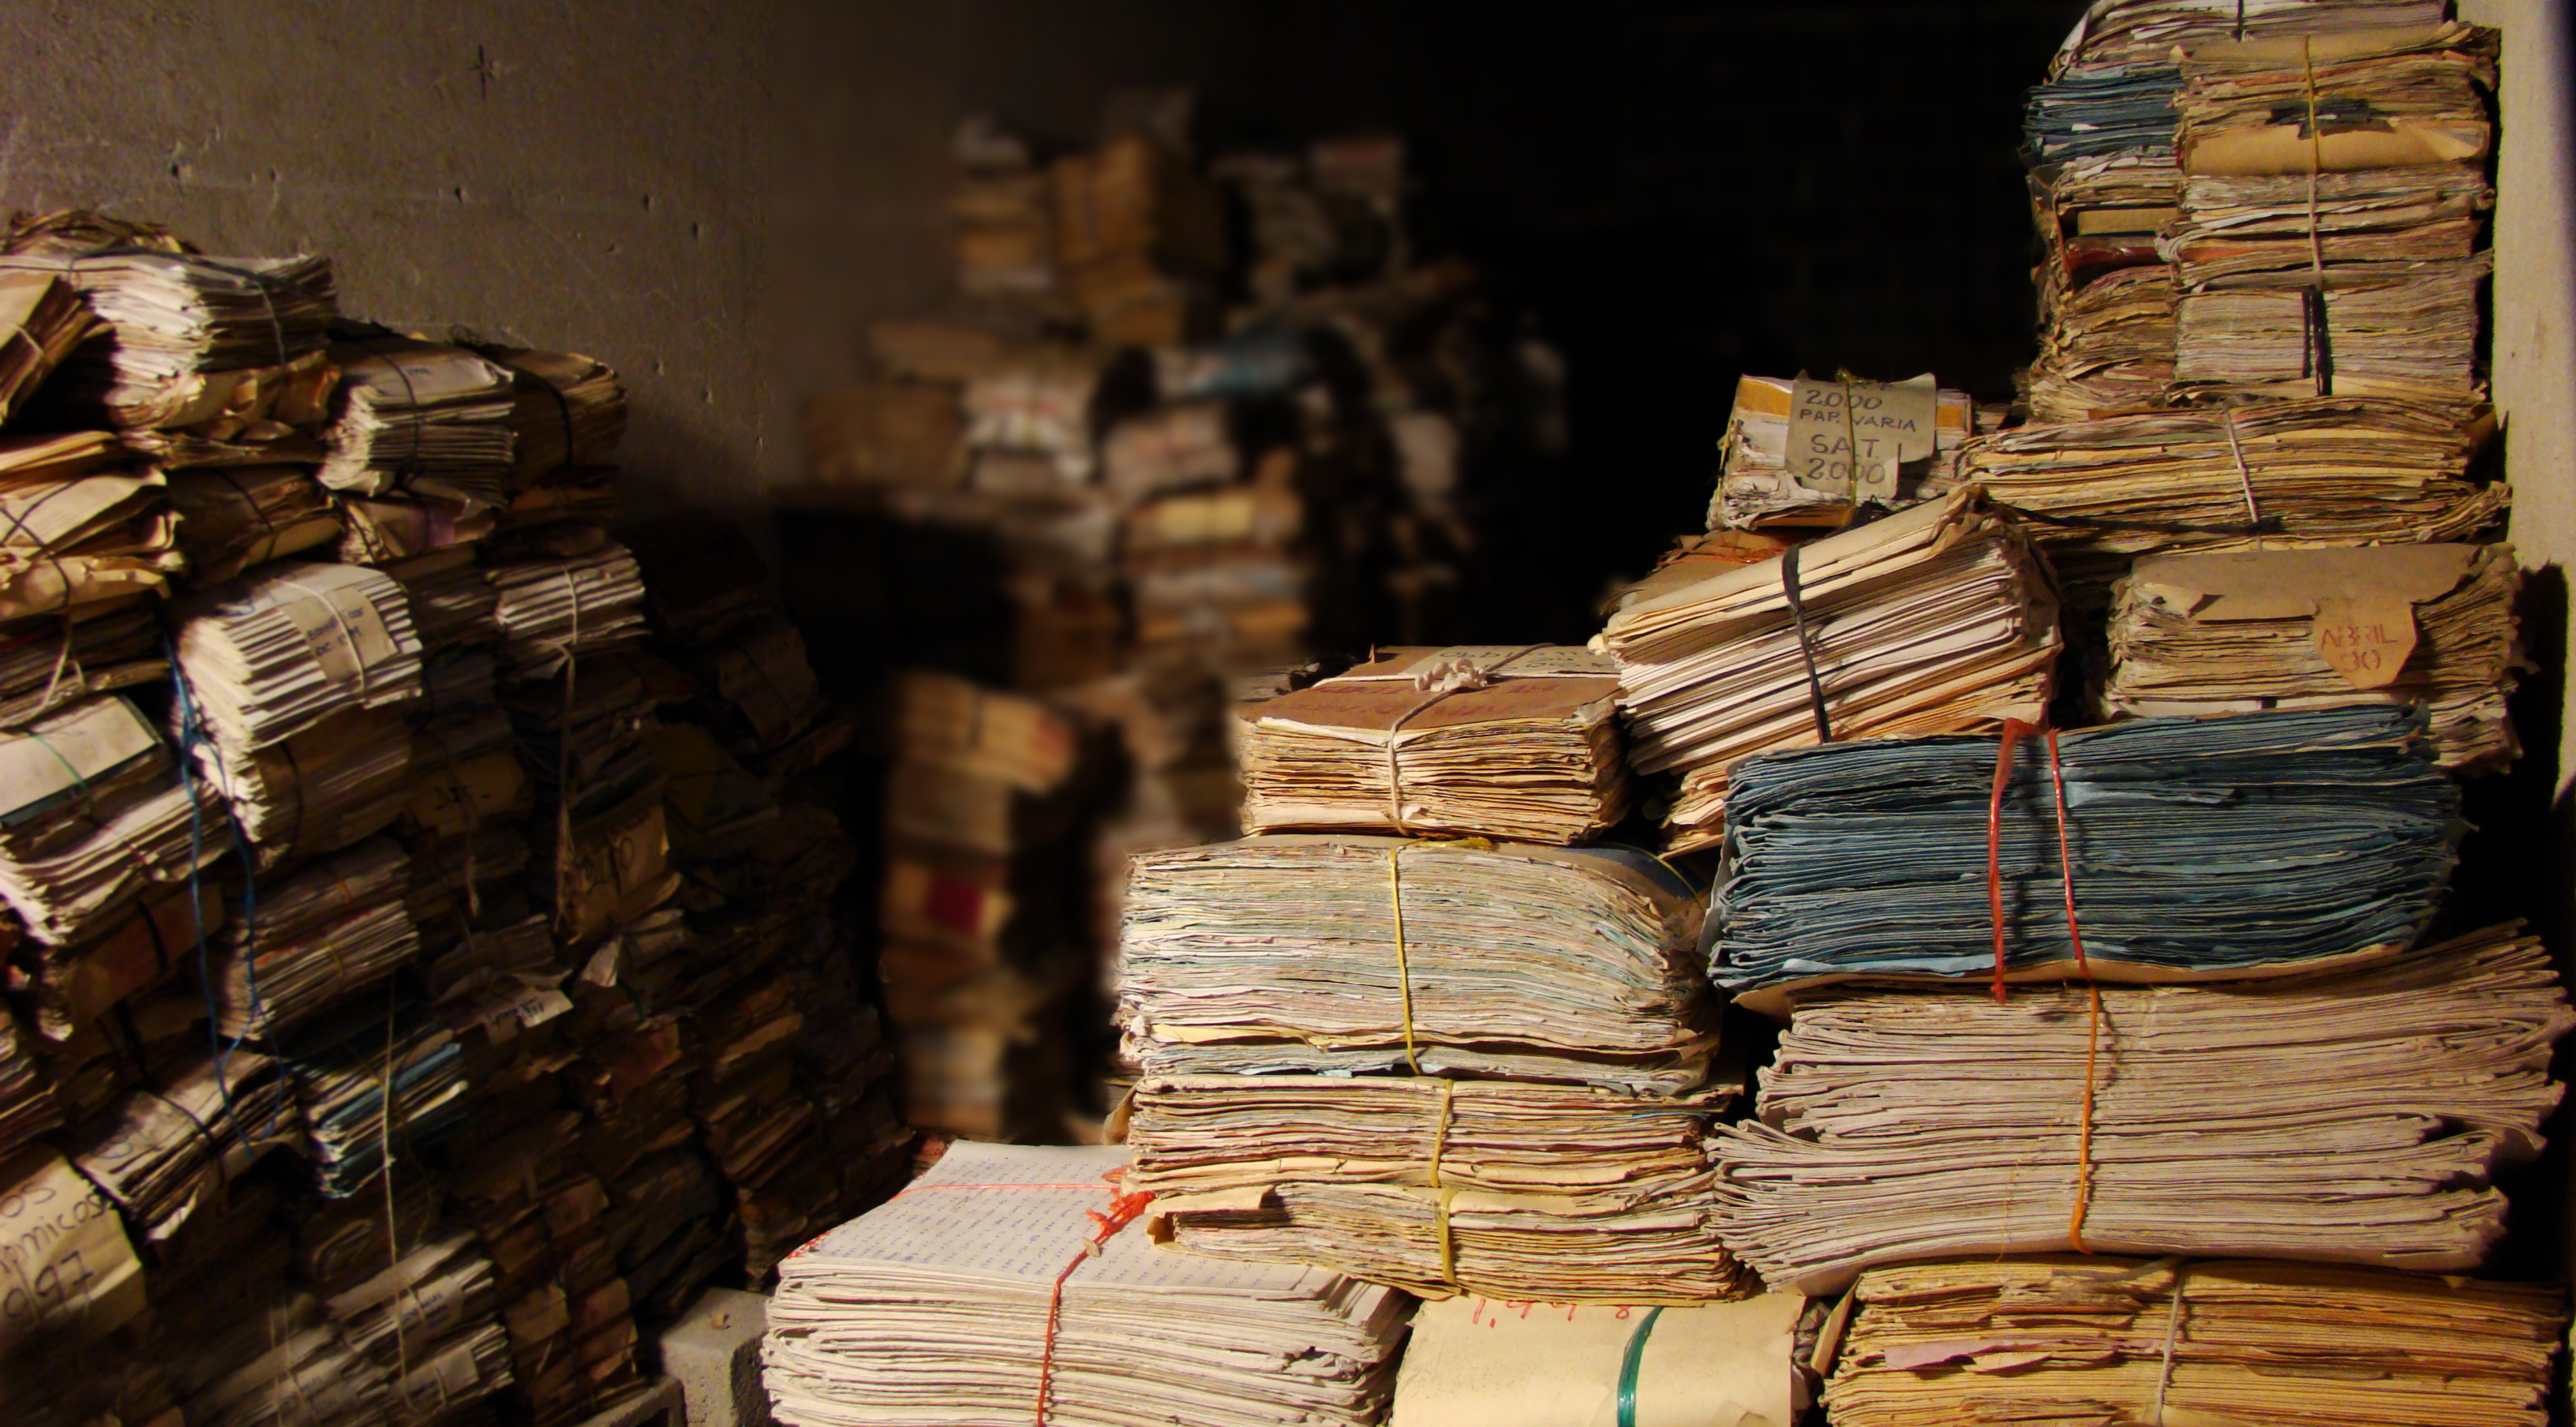 Archives: Foundation for dealing with the past in Colombia